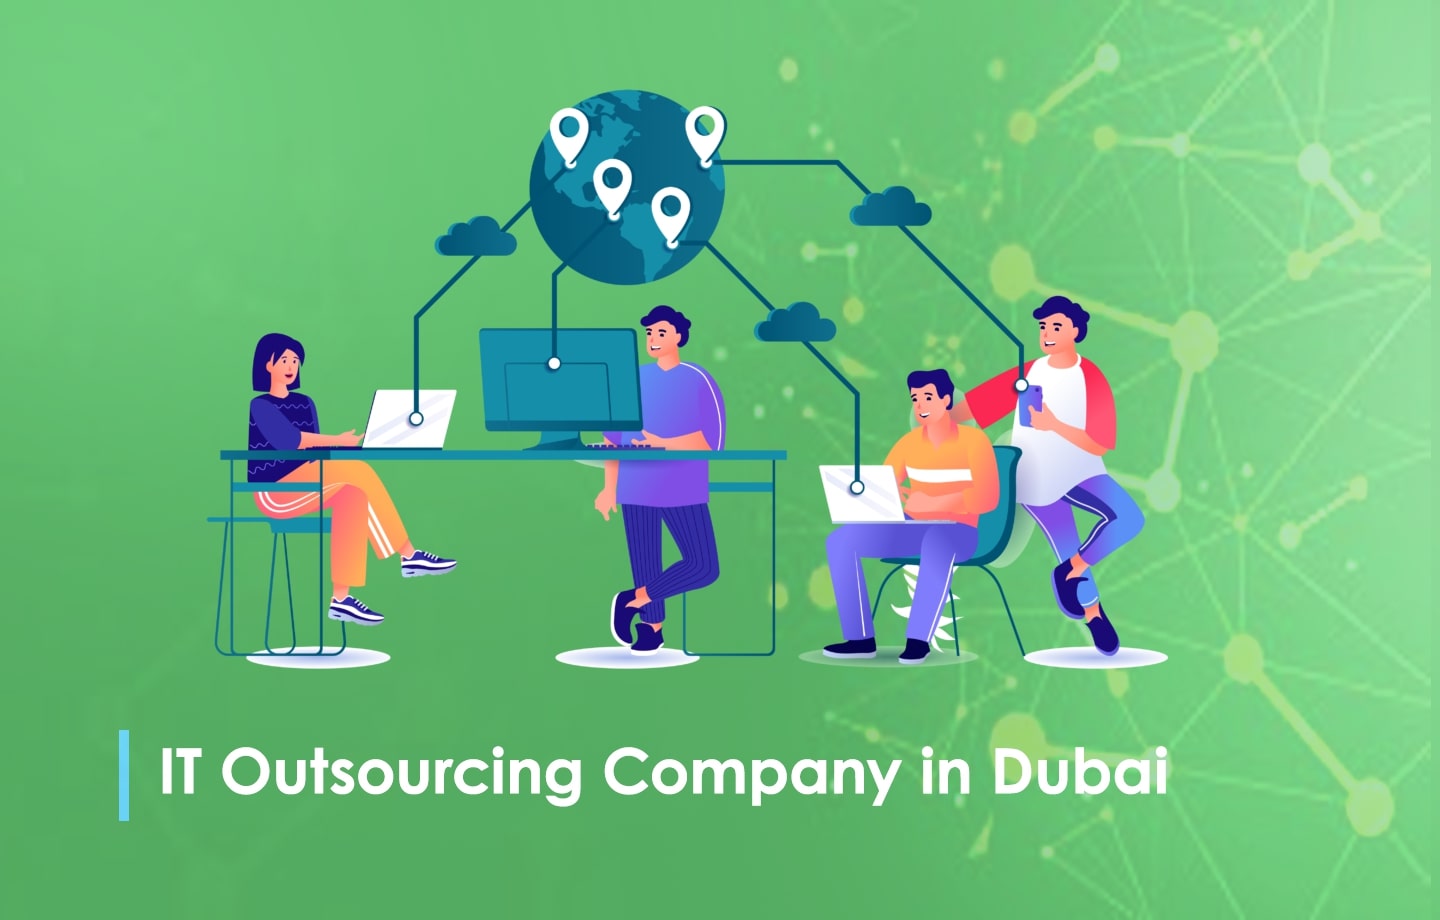 IT Outsourcing Company in Dubai